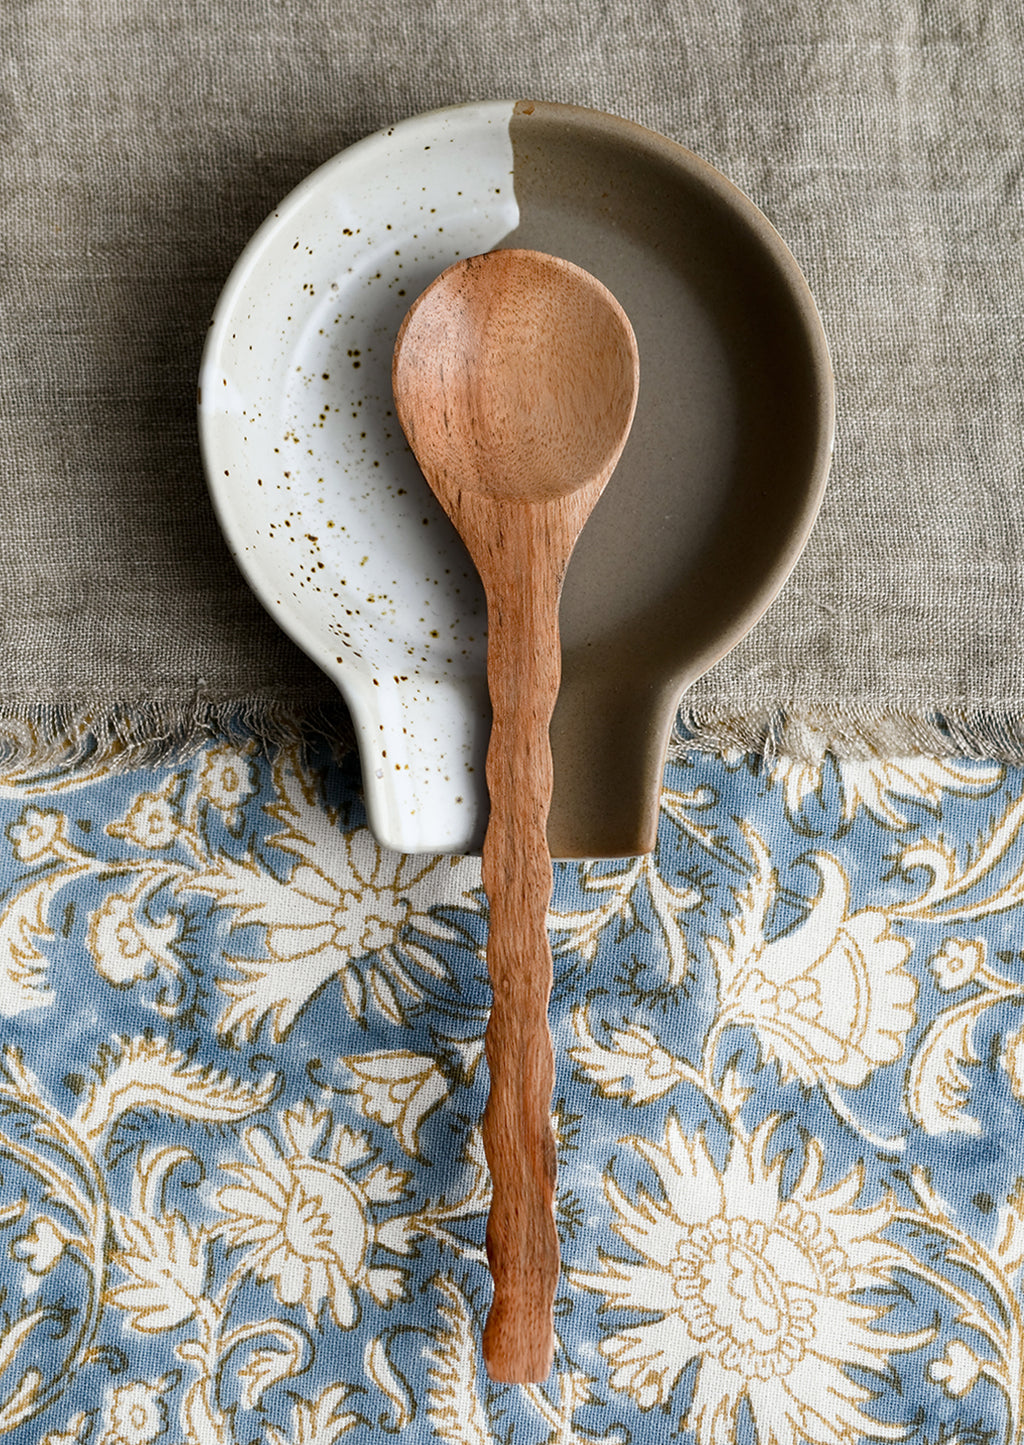 2: A wooden spoon on a ceramic spoon rest.